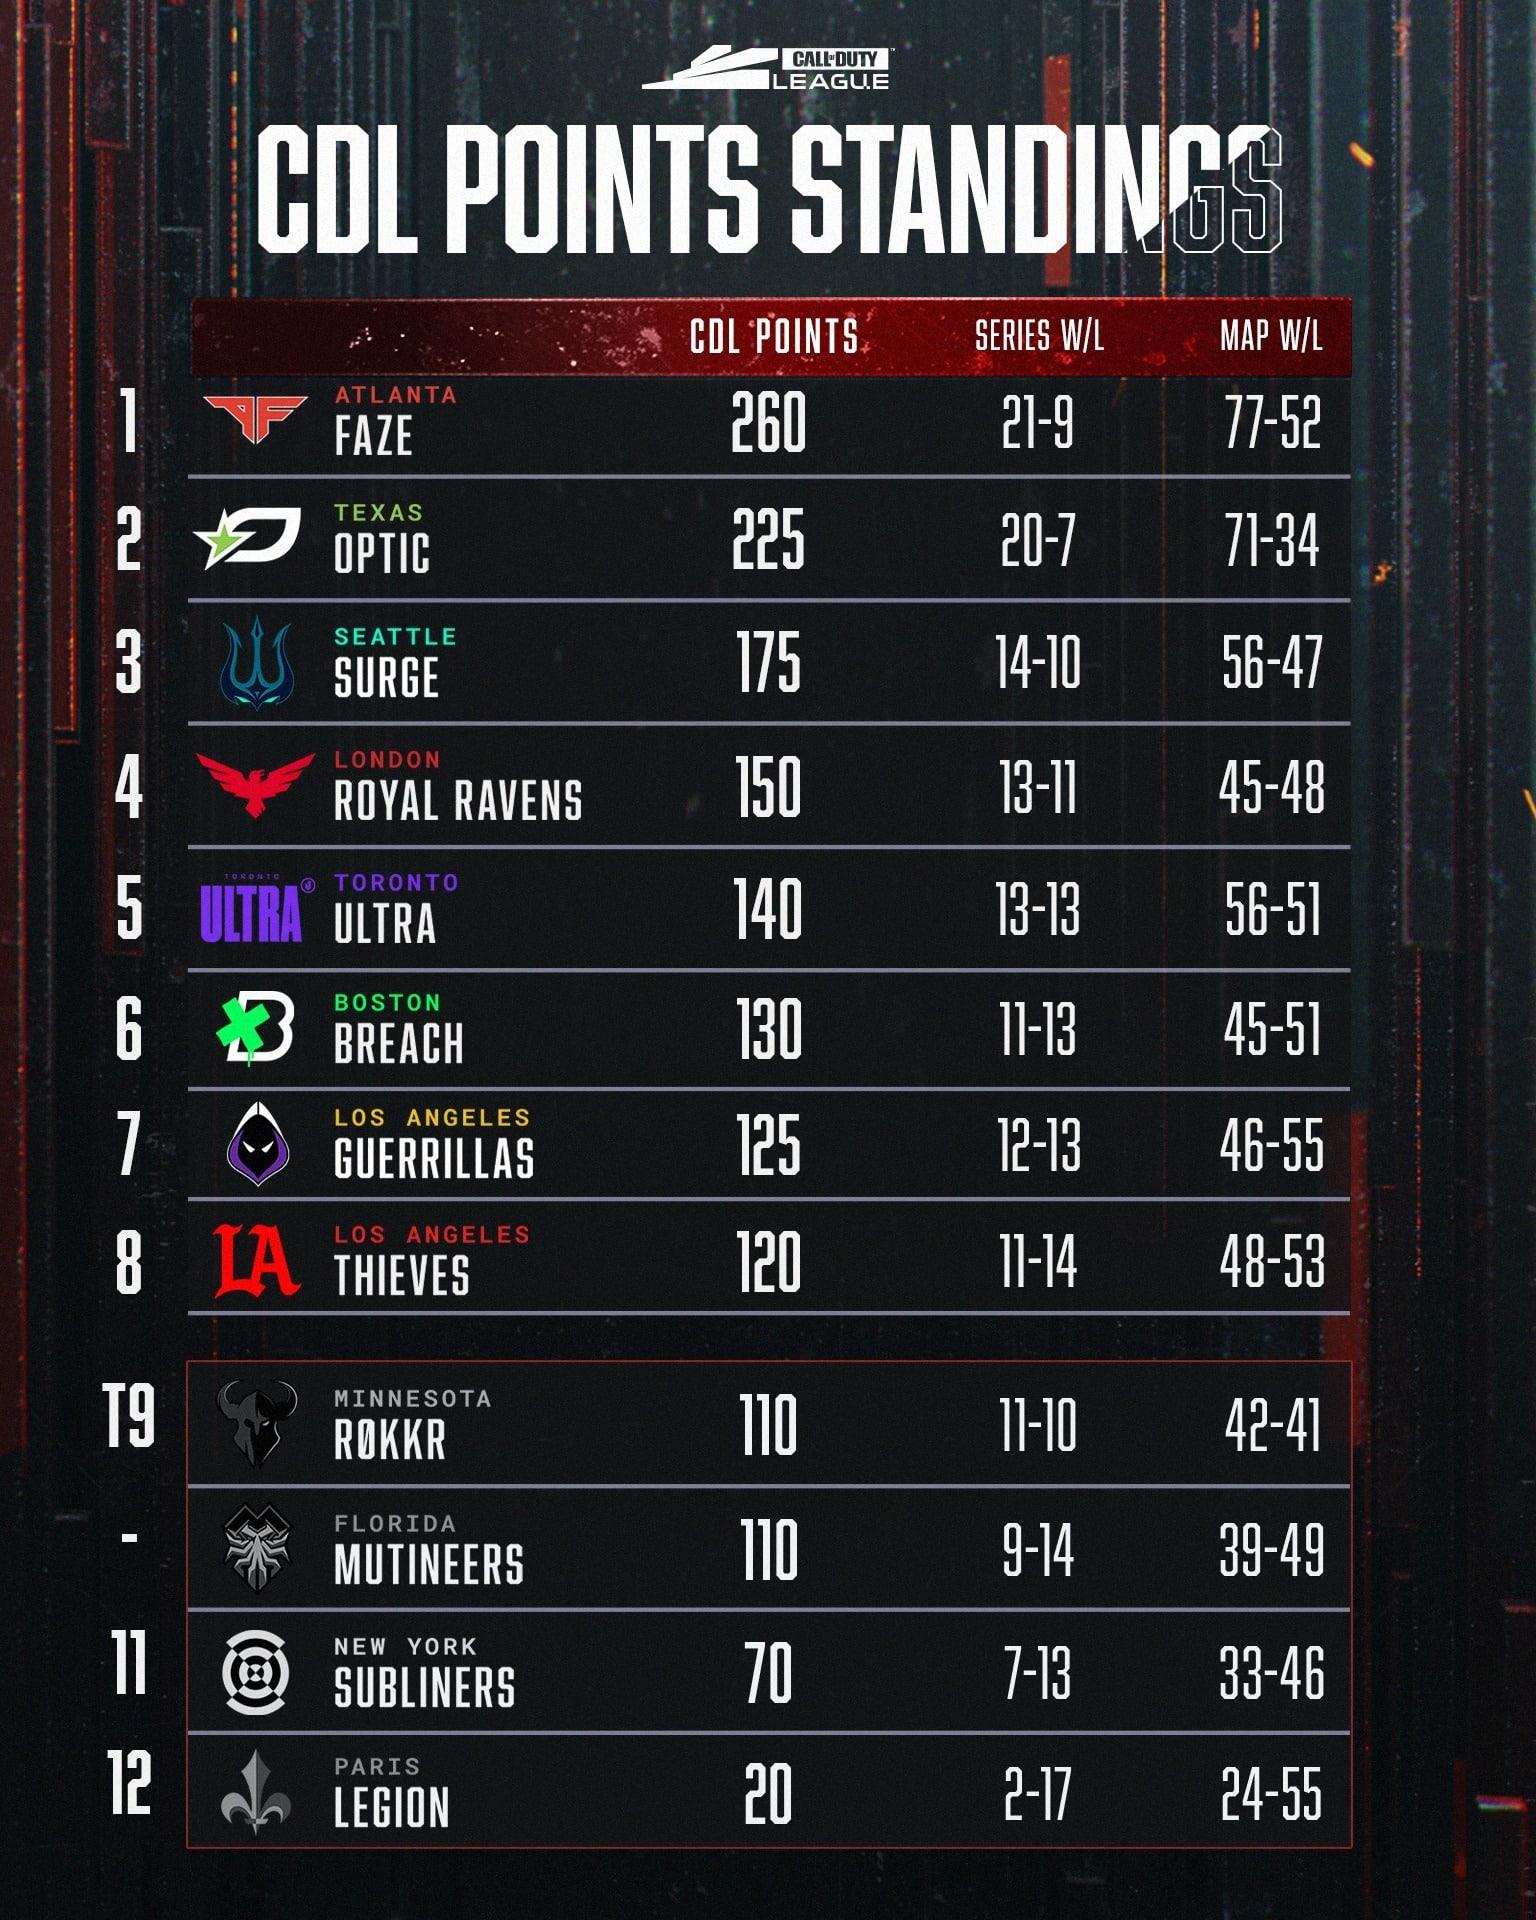 The CDL Standings after Major 3.